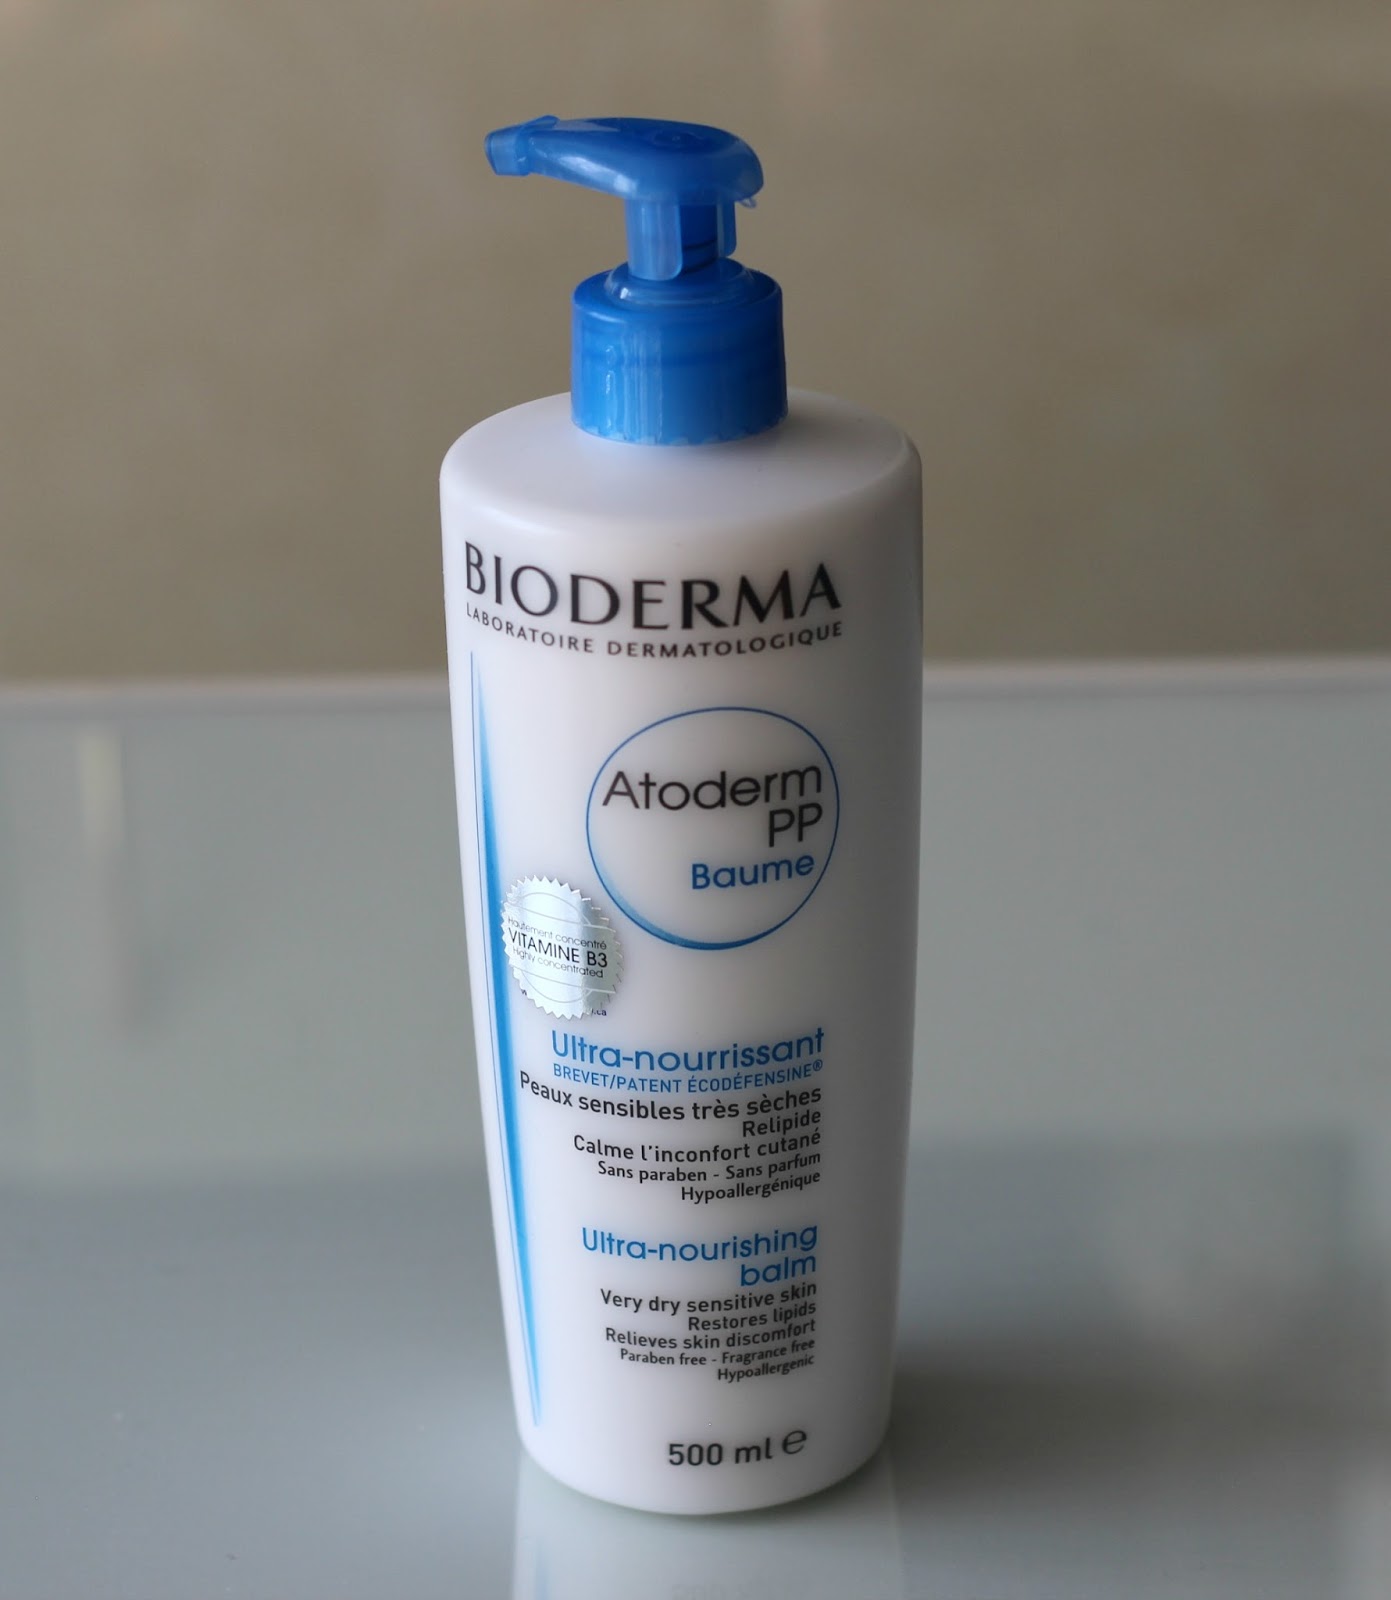 Bioderma Atoderm for Dry and Sensitive Skin | Loves Beauty